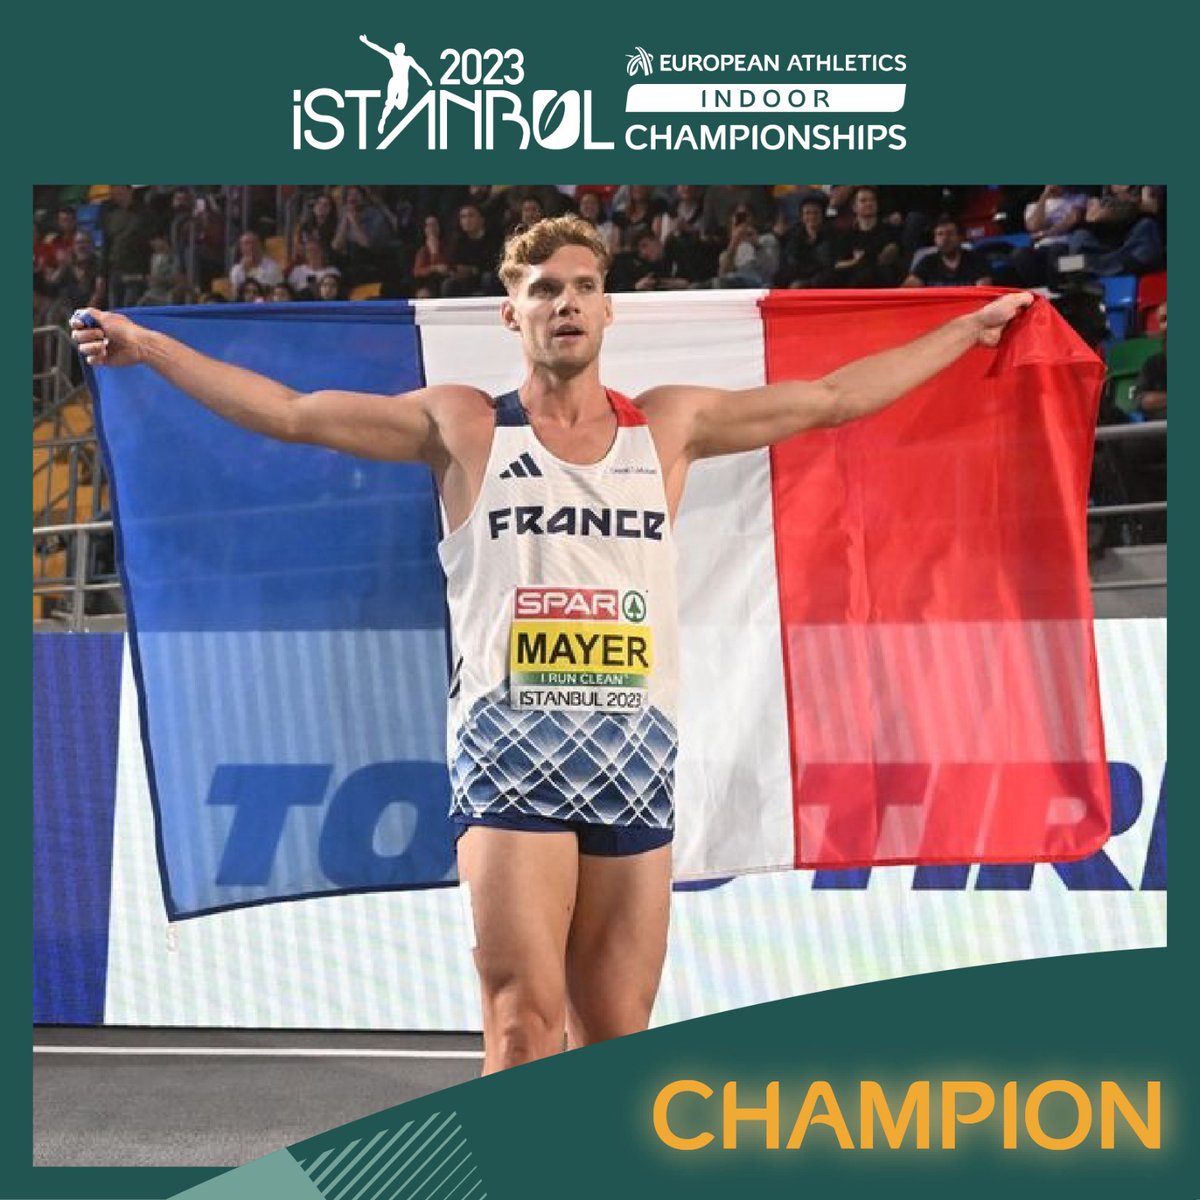 🥇Kevin Mayer's 3rd European indoor heptathlon gold medal came with 6348 pts while Sander Skotheim won Norway's first heptathlon medal in the event history by breaking the national record with 6318. Risto Lillemets took🥉(6079) and carried Estonia to the podium since 2009.